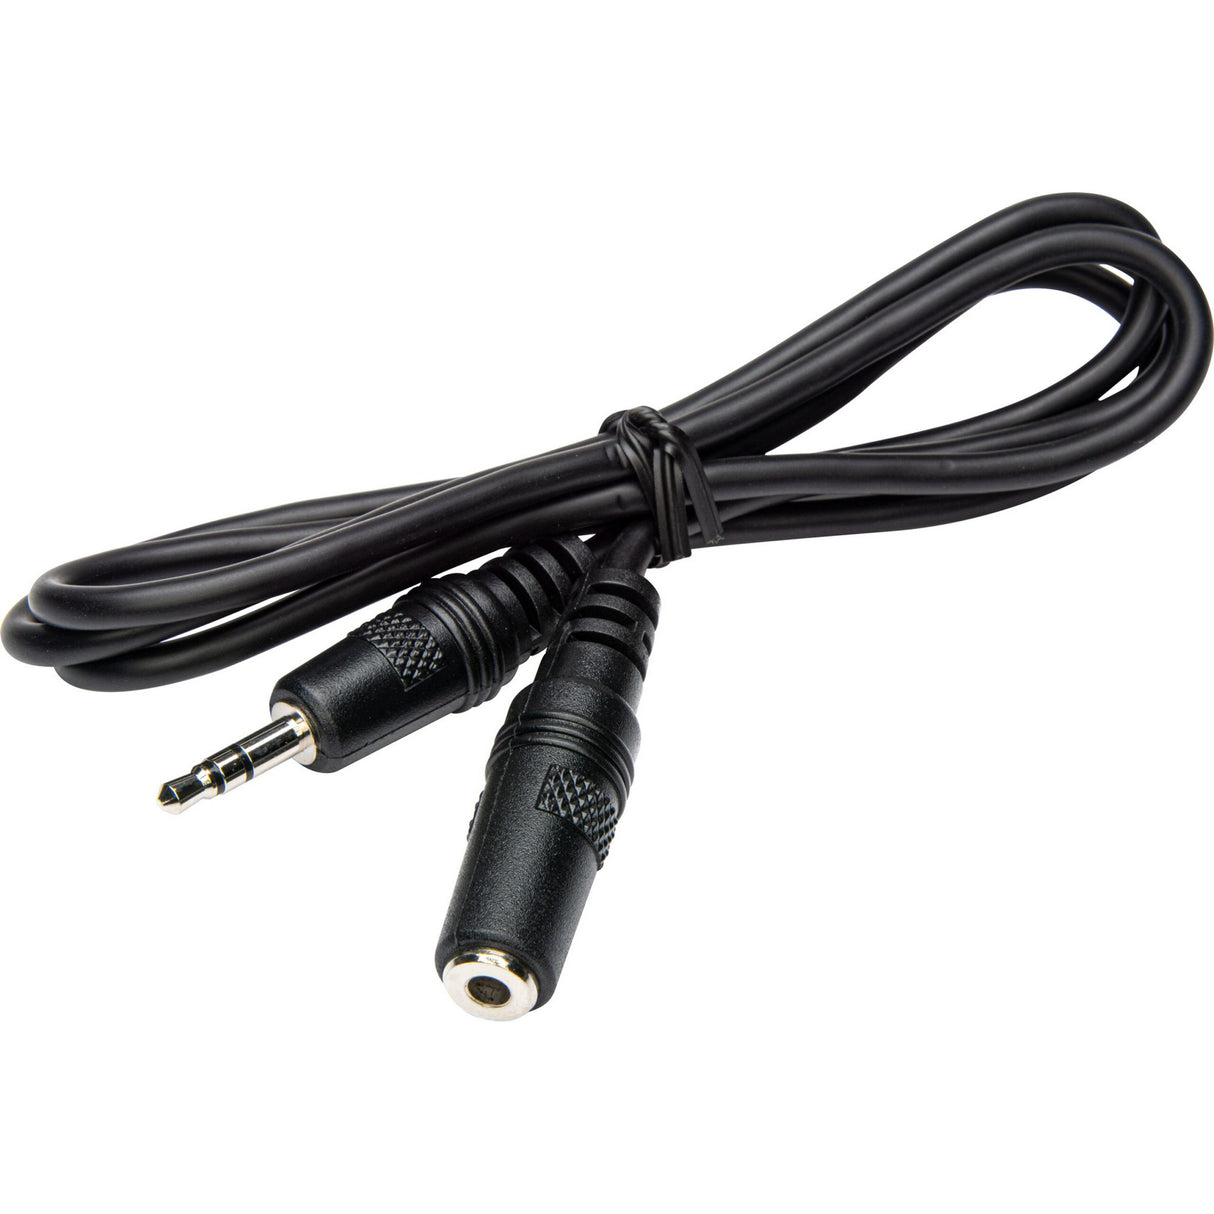 Connectronics Stereo 3.5mm Mini Male to Stereo 3.5mm Mini Female Cable, 6 Foot